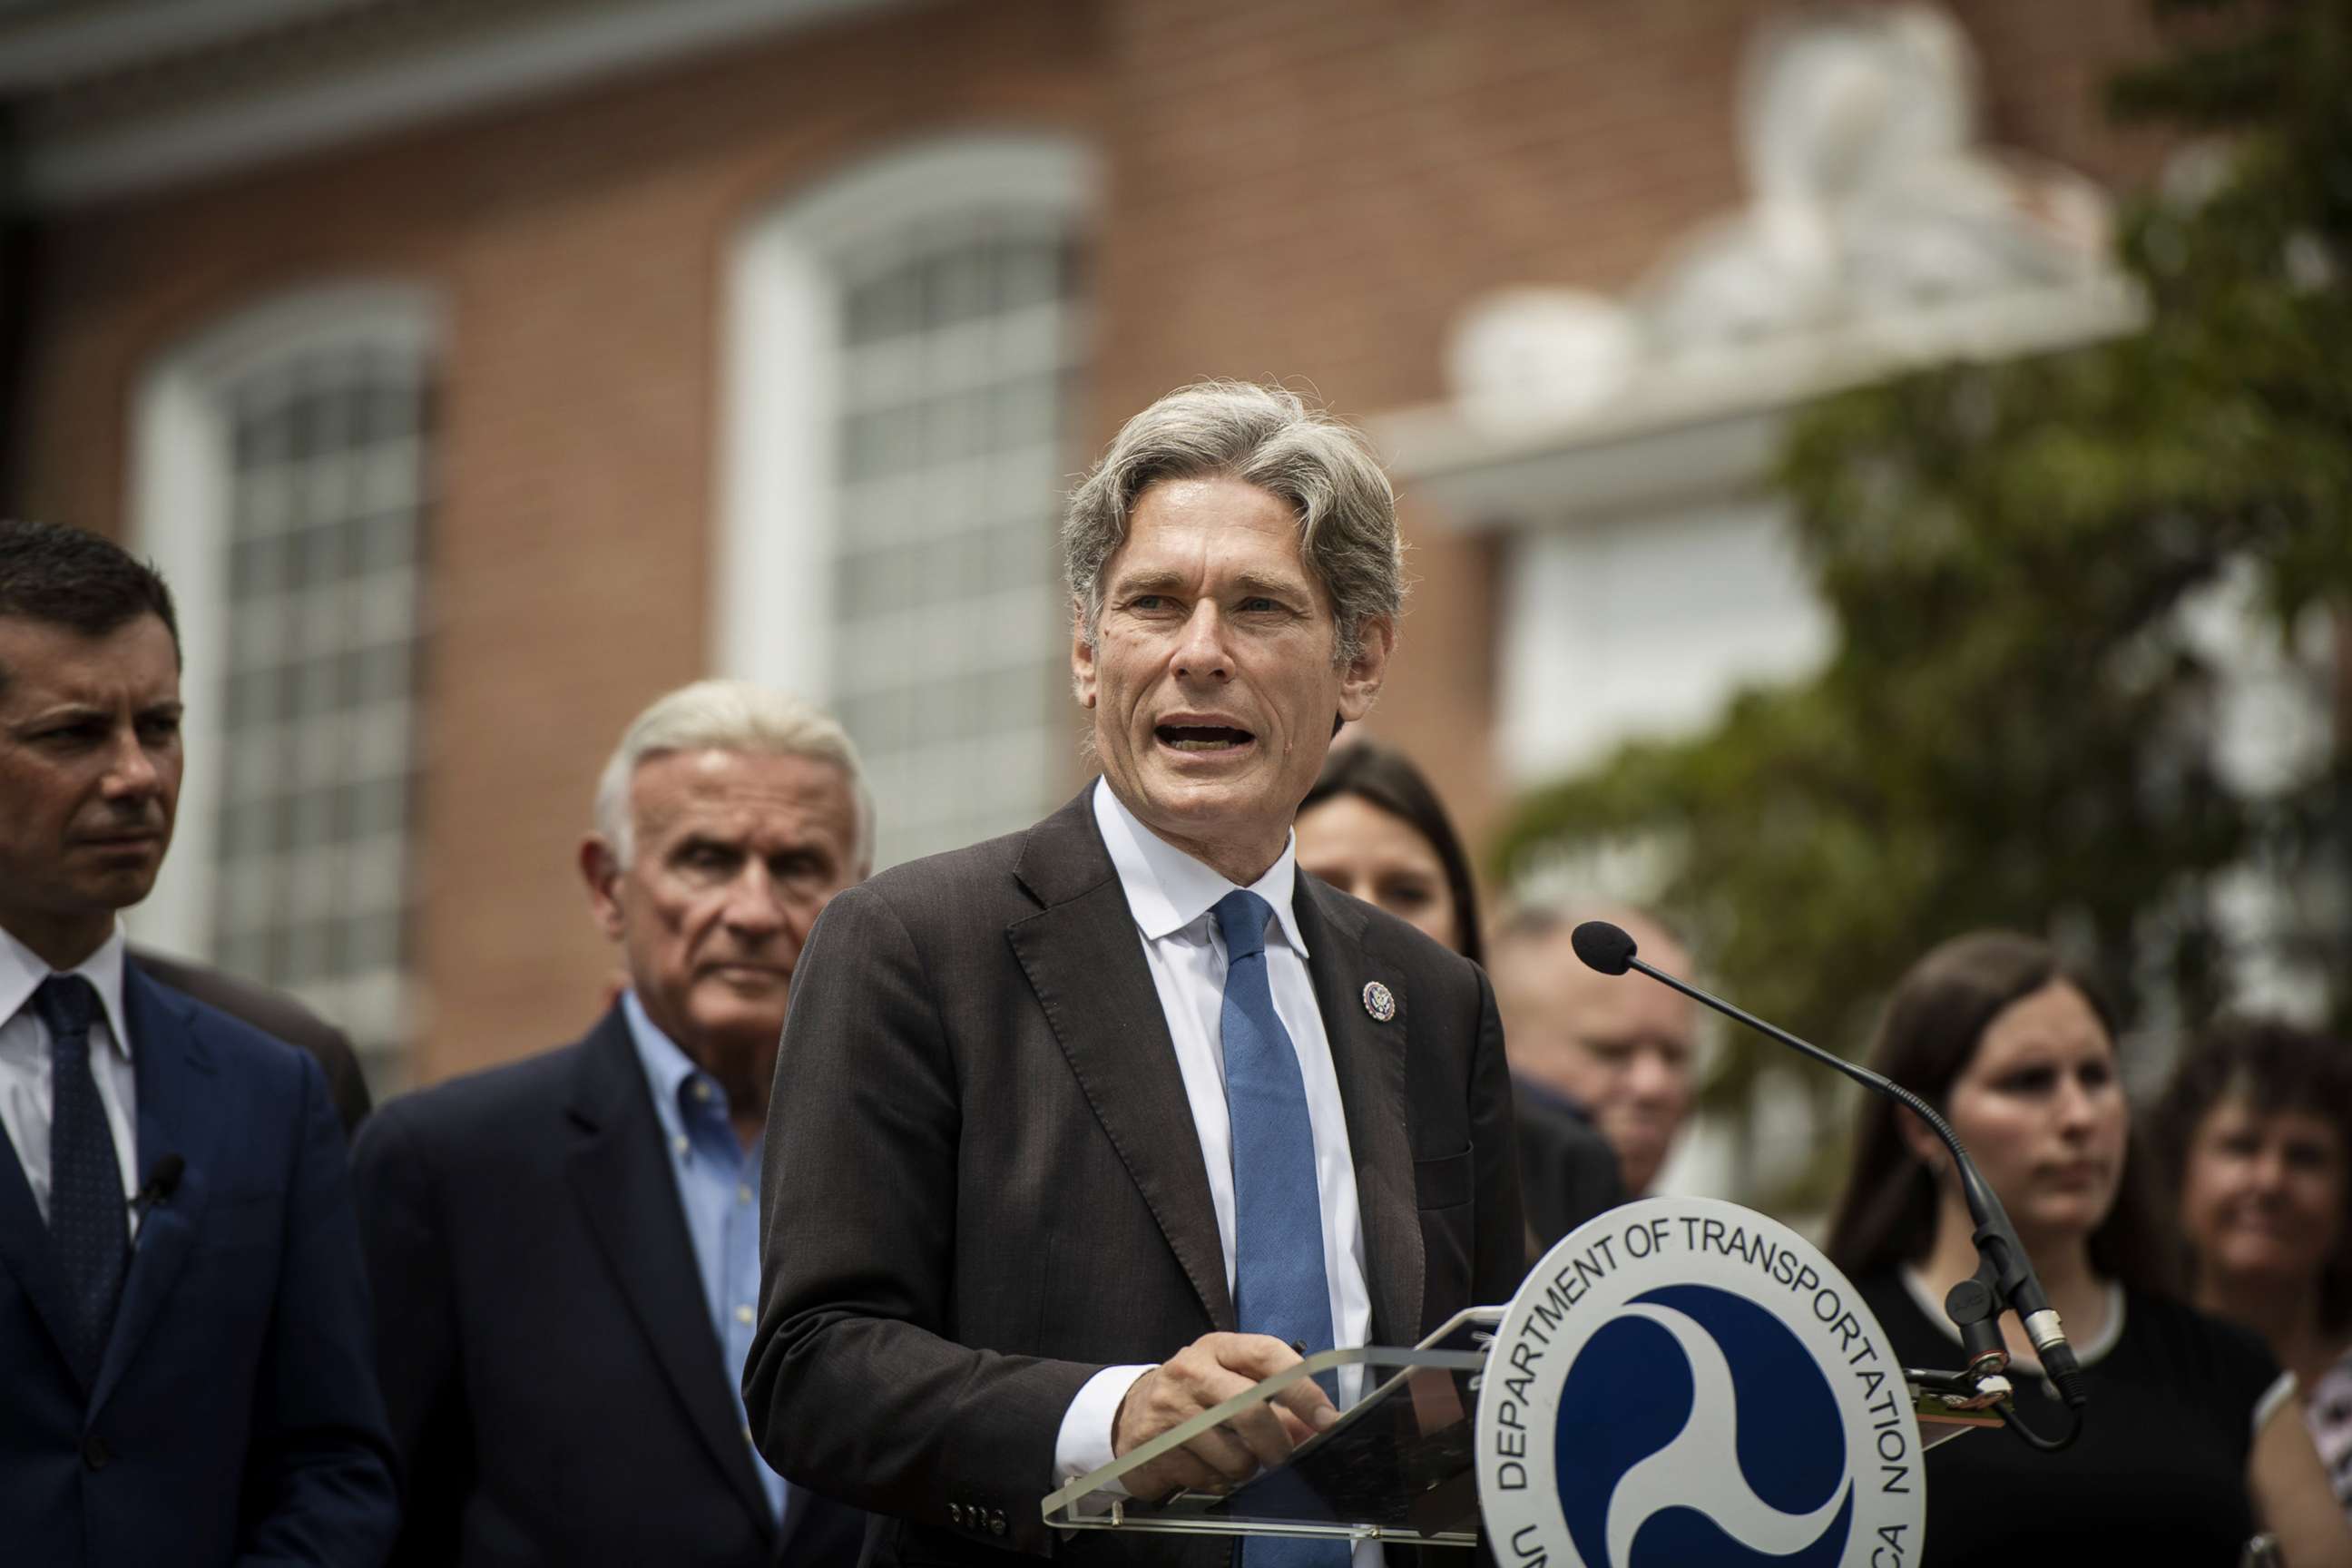 PHOTO: Rep. Tom Malinowski speaks during a news conference in Westfield, N.J., Aug. 9, 2021.